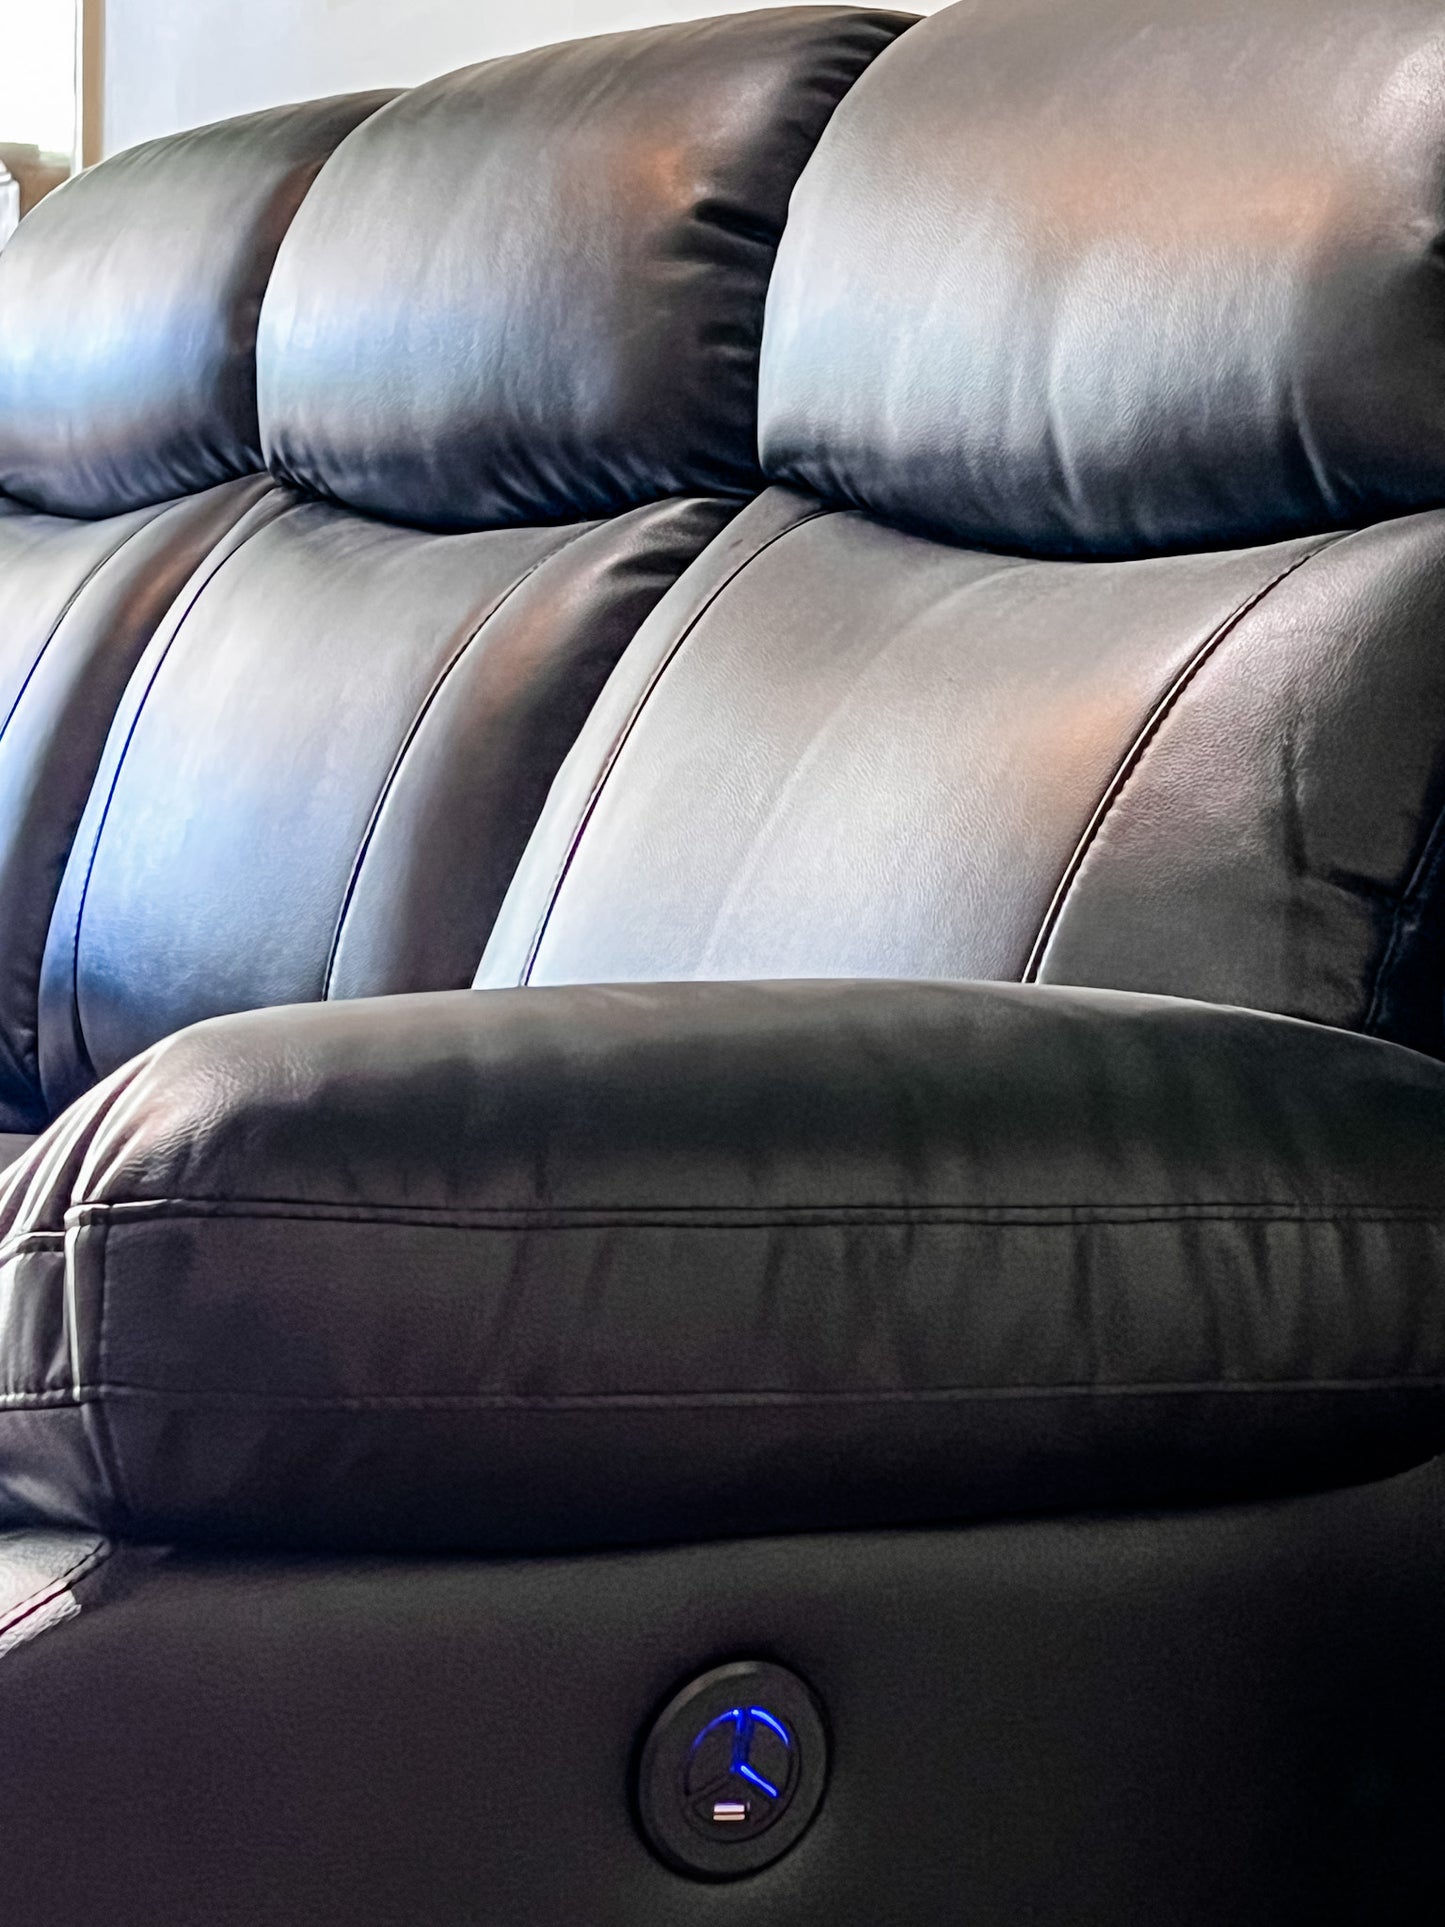 Full Cinema Couch Set - 3 Seater, 2 Seater. 1 Seater